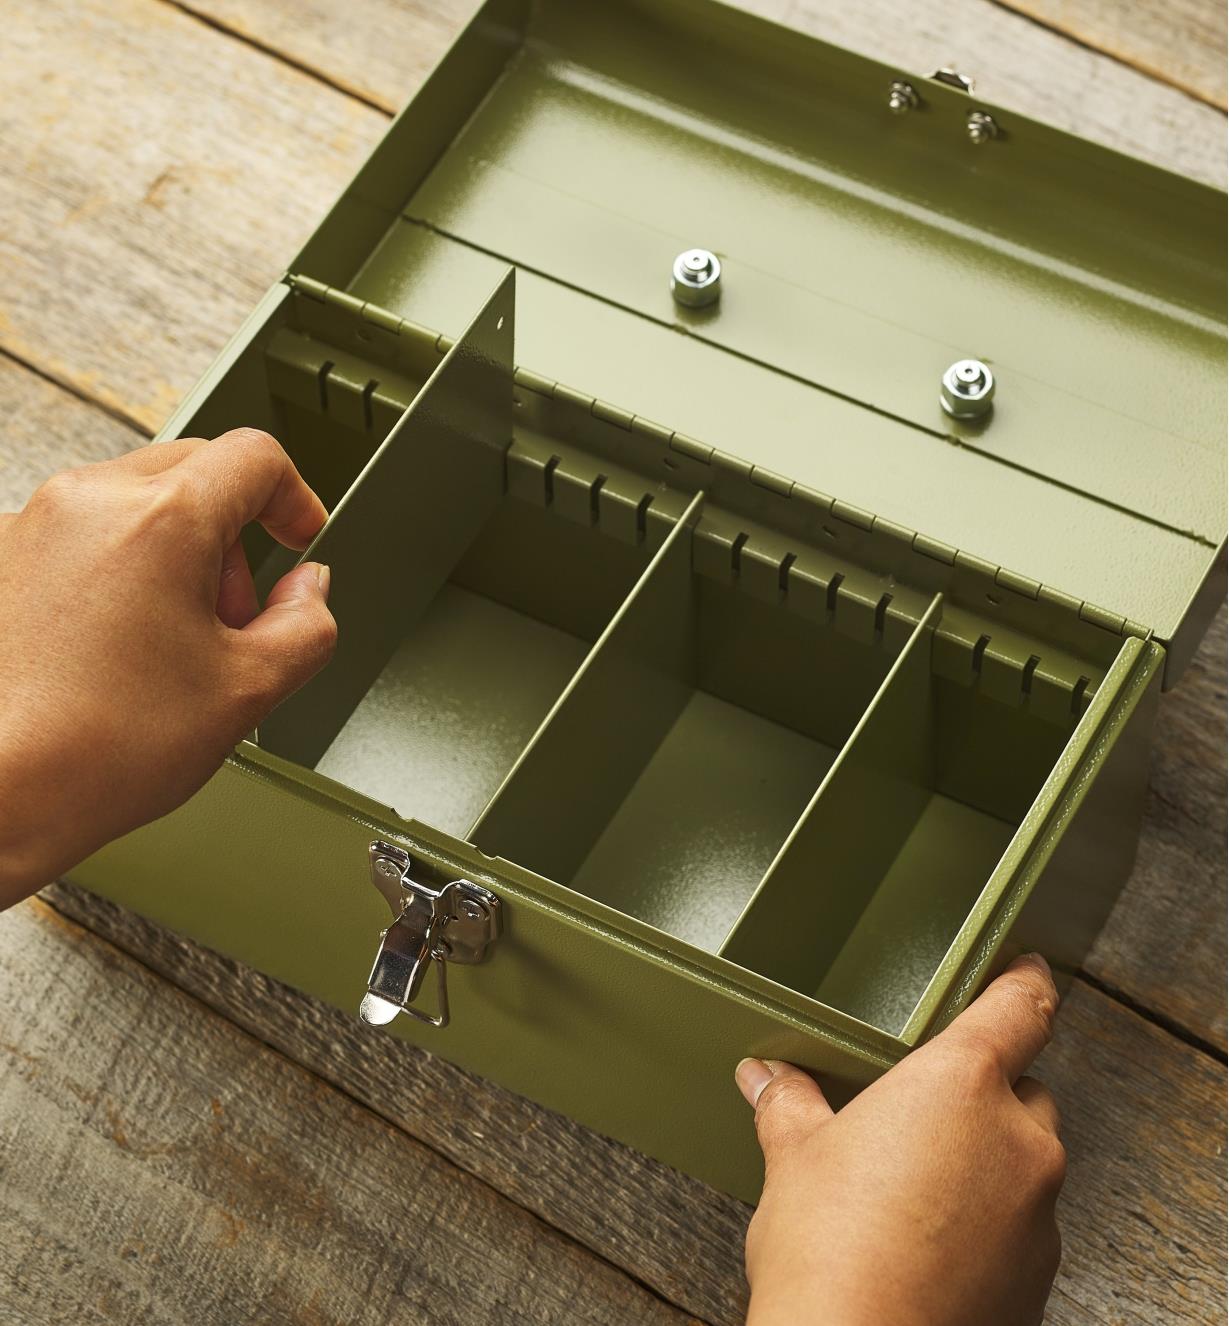 A person arranges the repositionable dividers inside a seed keeper box